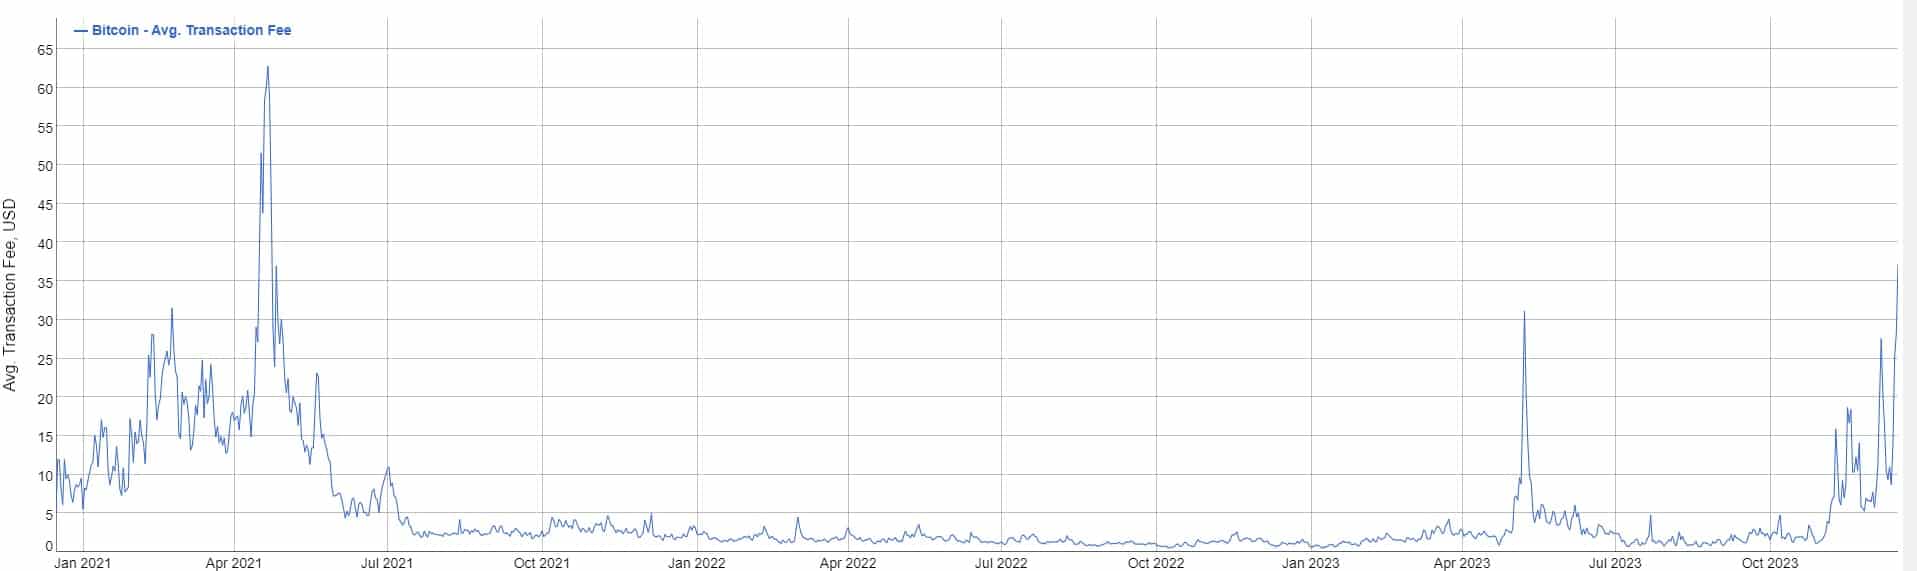 Evolution of average transaction fees on Bitcoin over the past 3 years